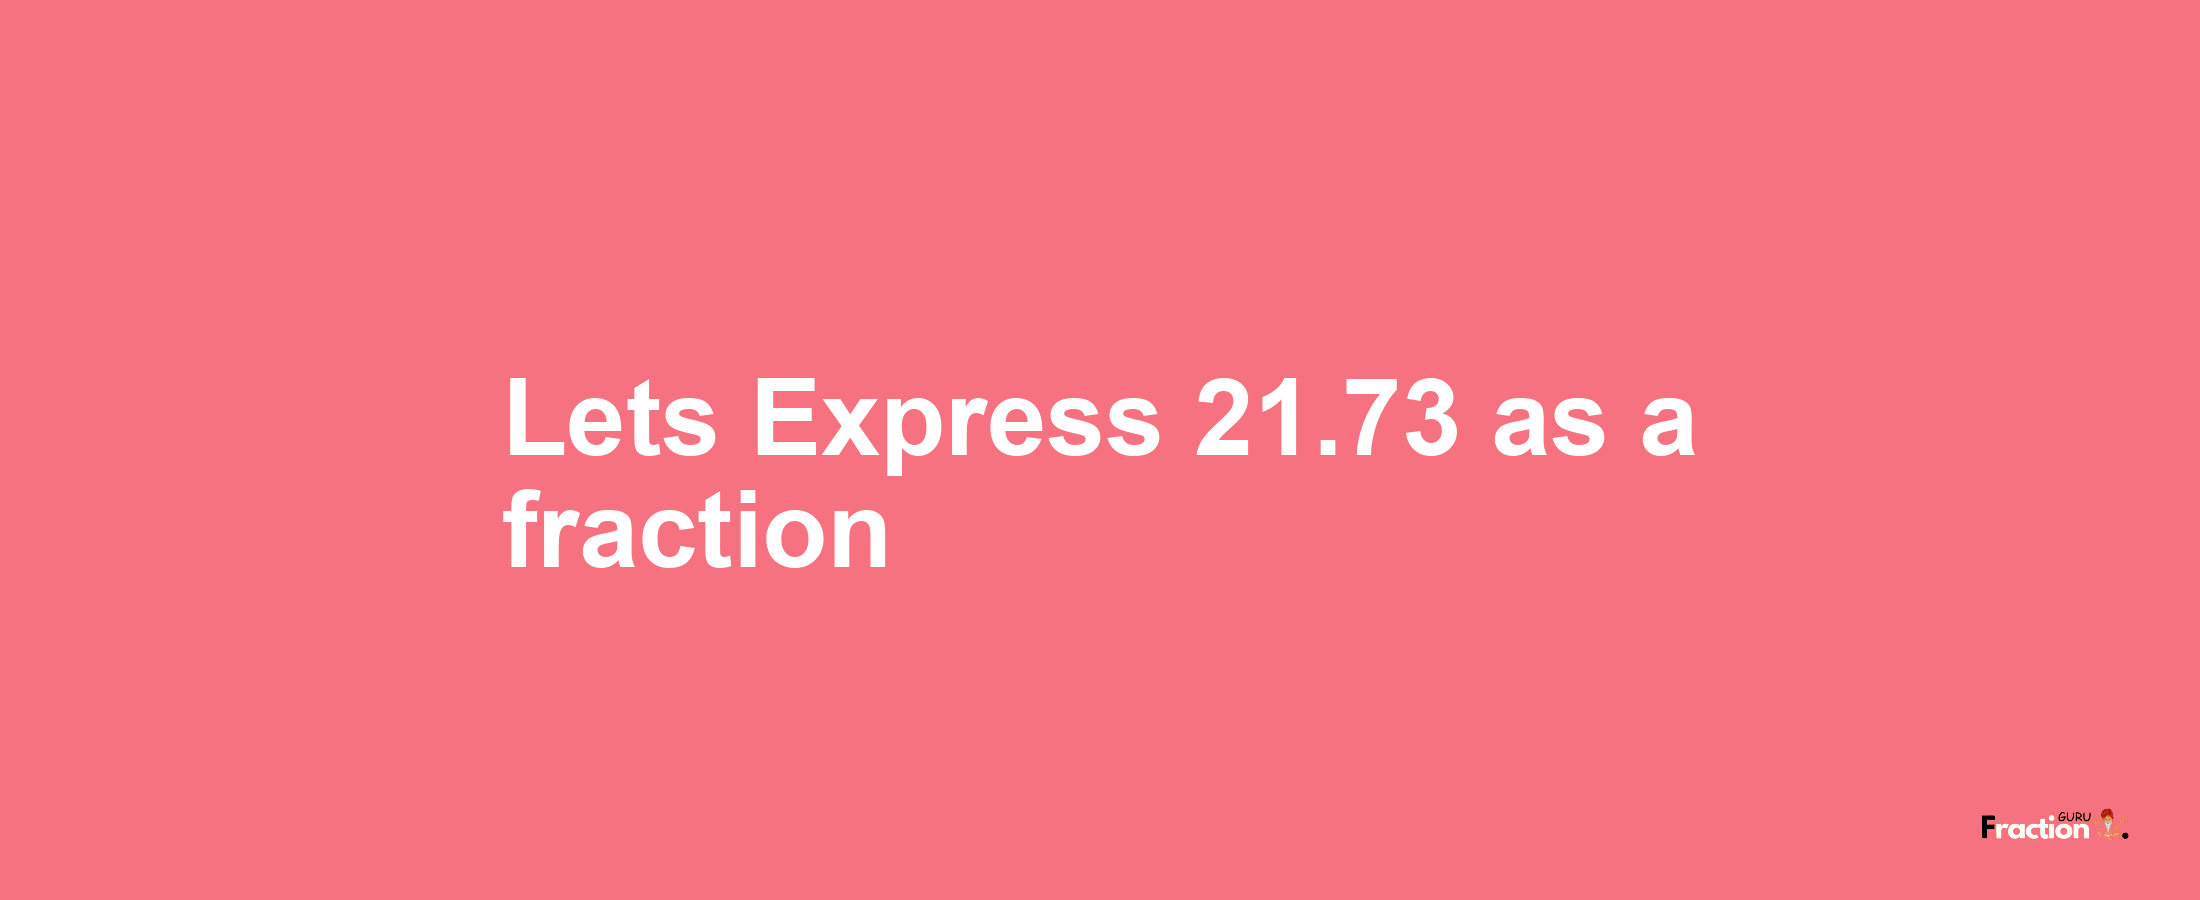 Lets Express 21.73 as afraction